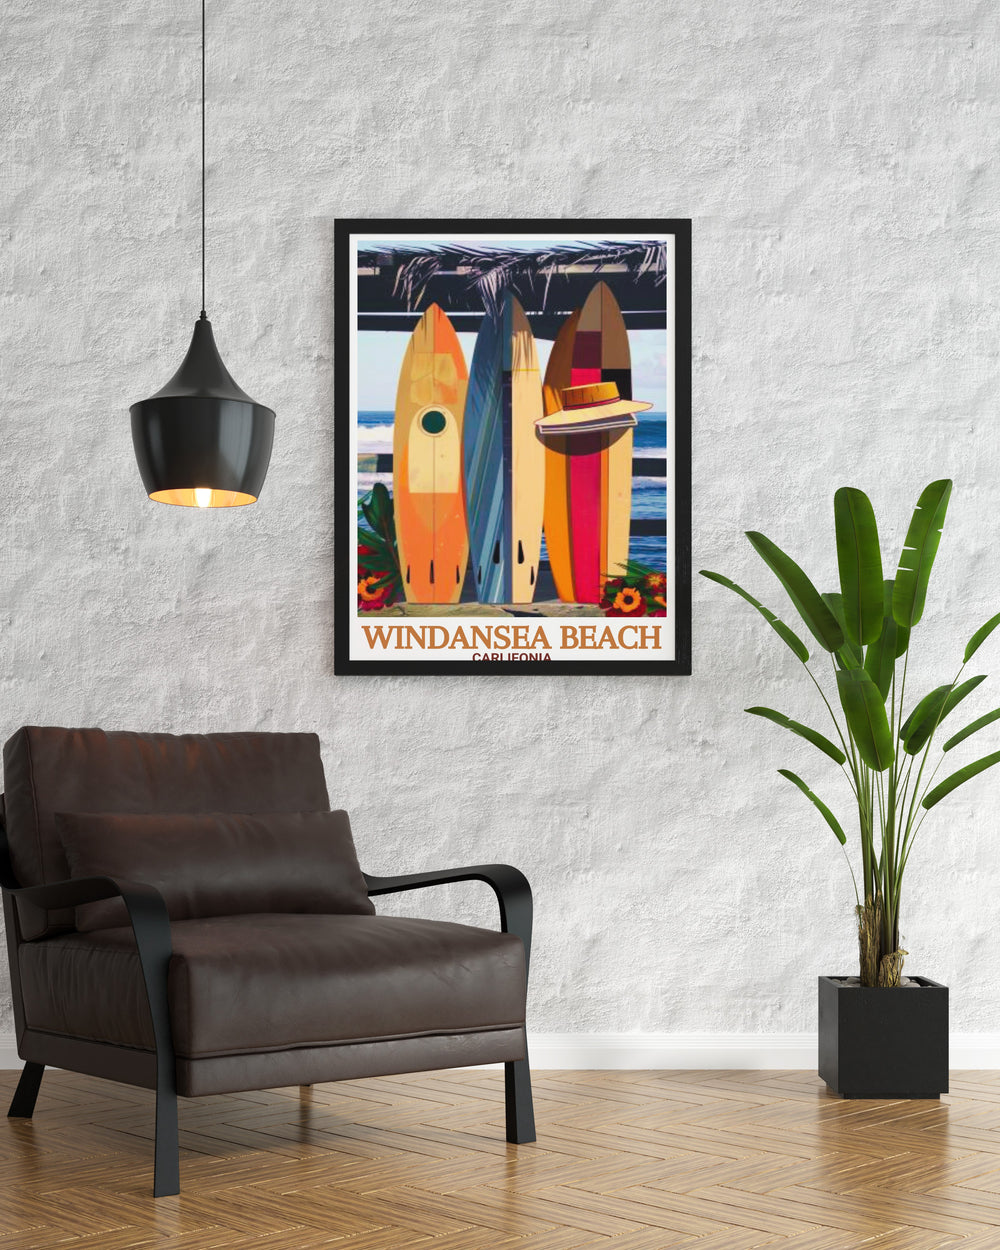 La Jolla Poster showcasing the beautiful Windansea Beach Shack and surfing waves perfect for modern décor. This vintage California poster is a wonderful travel poster print and an excellent personalized gift for those who love the beach.